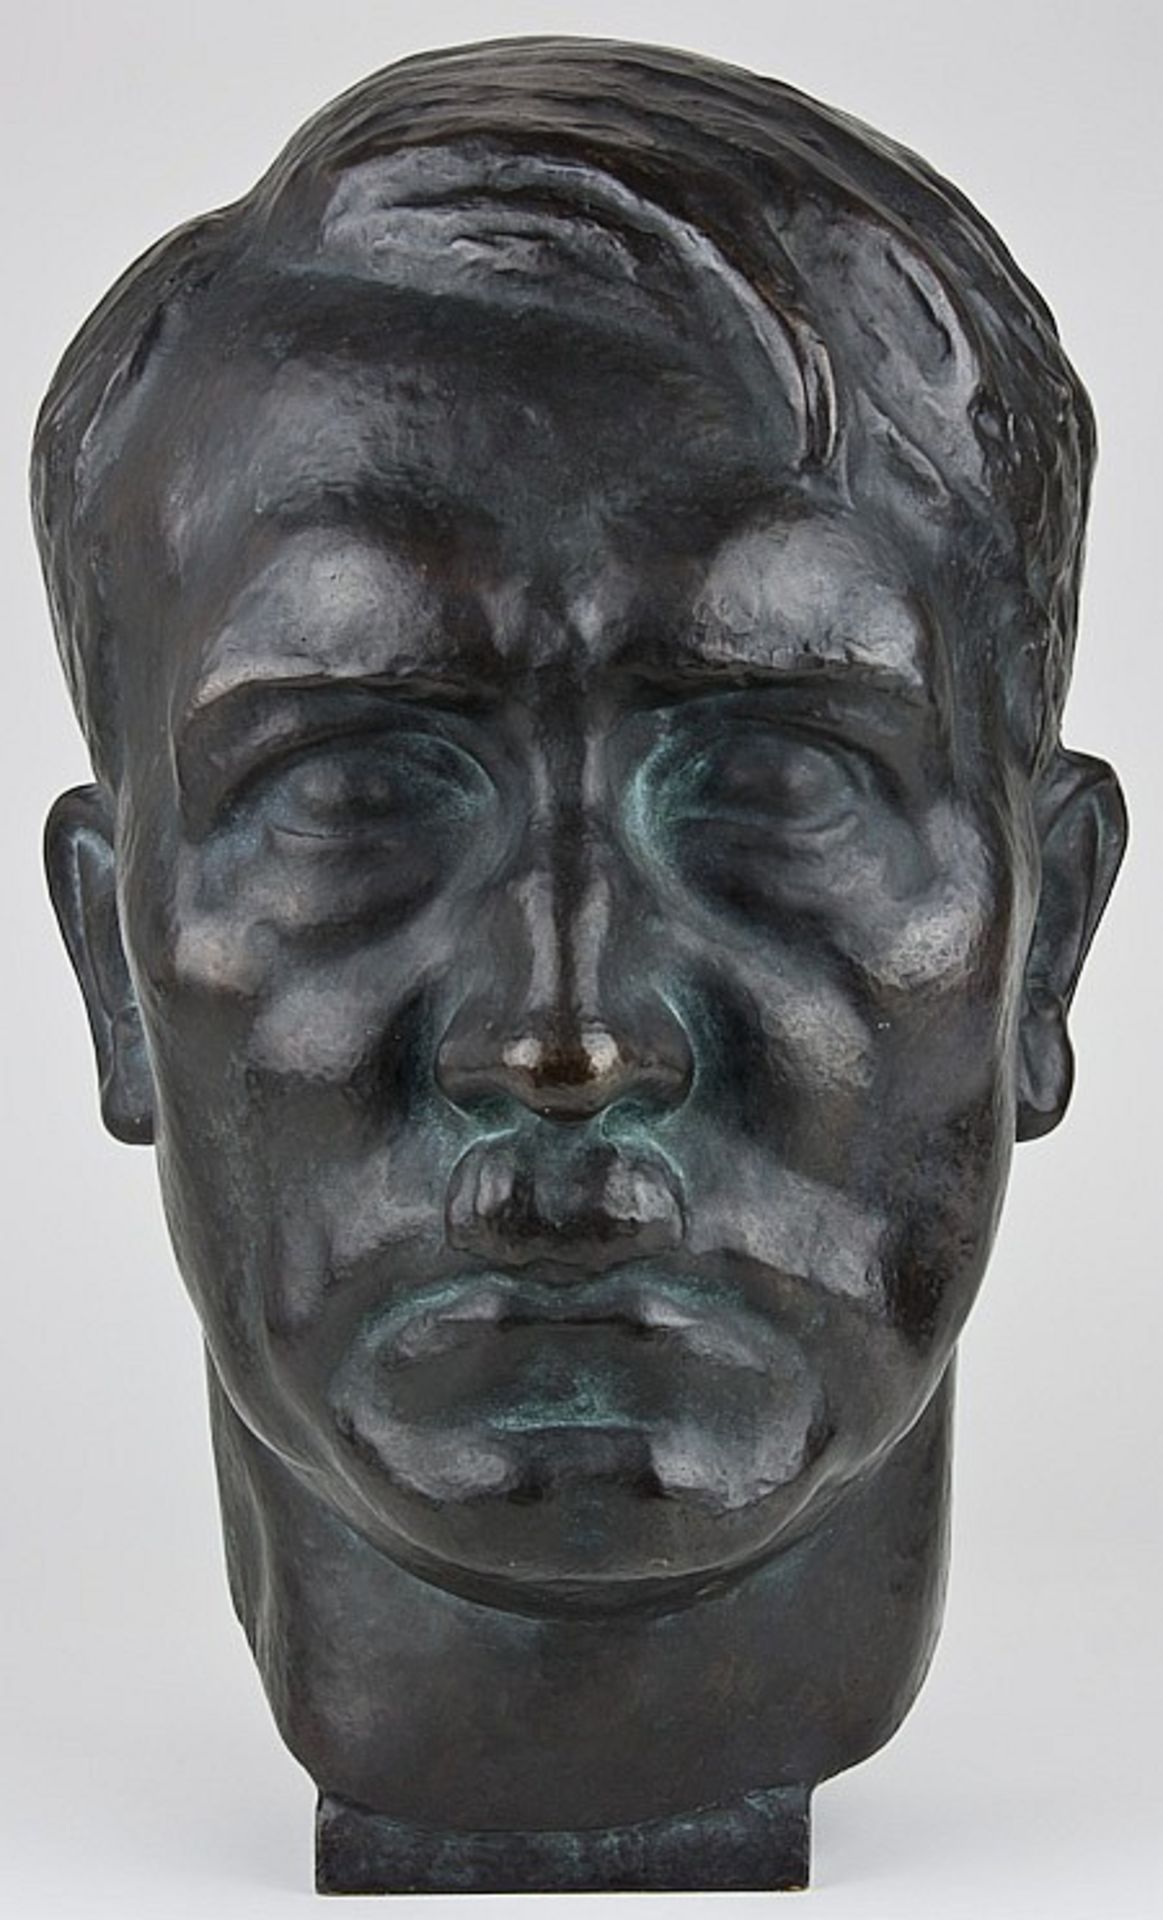 BUST OF ADOLF HITLER OWNED BY JOSEPH GOEBBELS AND PRESENTED TO ONE OF HIS SPIES